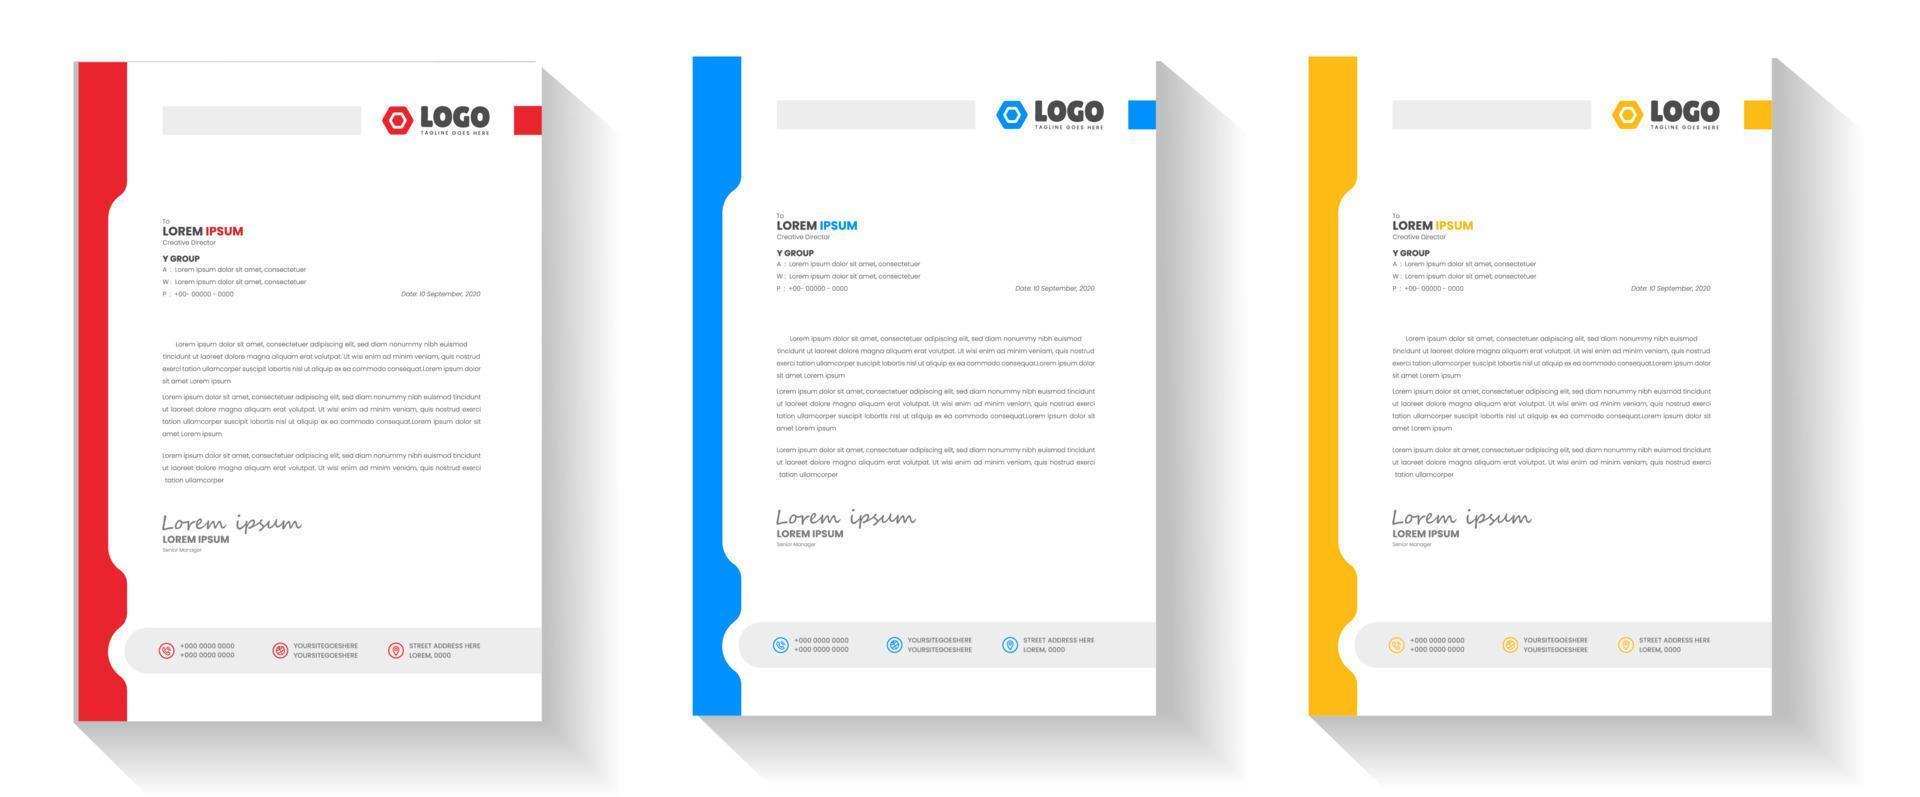 corporate modern business letterhead design template with yellow, blue and red color. creative modern letterhead design template for your project. letter head, letterhead, business letterhead design. vector